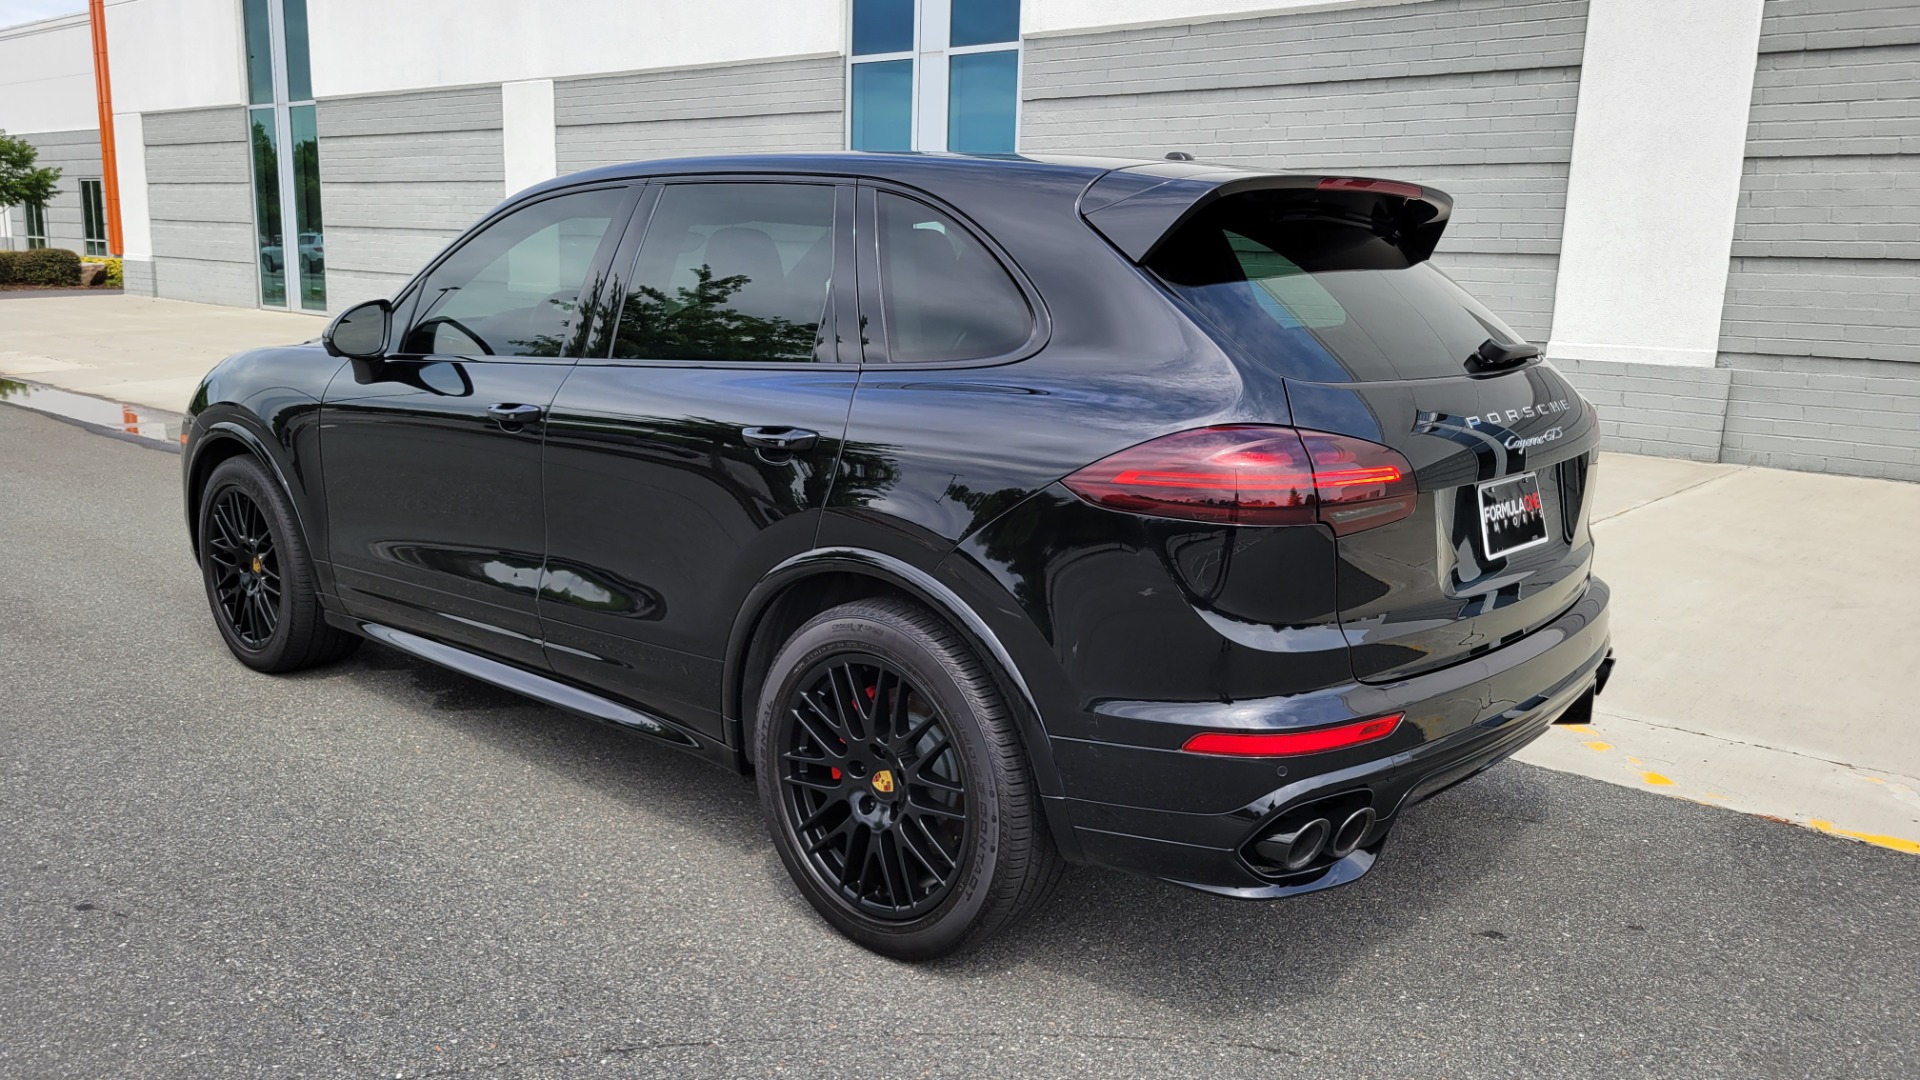 Used 2017 Porsche CAYENNE GTS 3.6L / NAV / SUNROOF / BOSE / PARK ASST / LCA / CAMERA for sale $64,995 at Formula Imports in Charlotte NC 28227 4